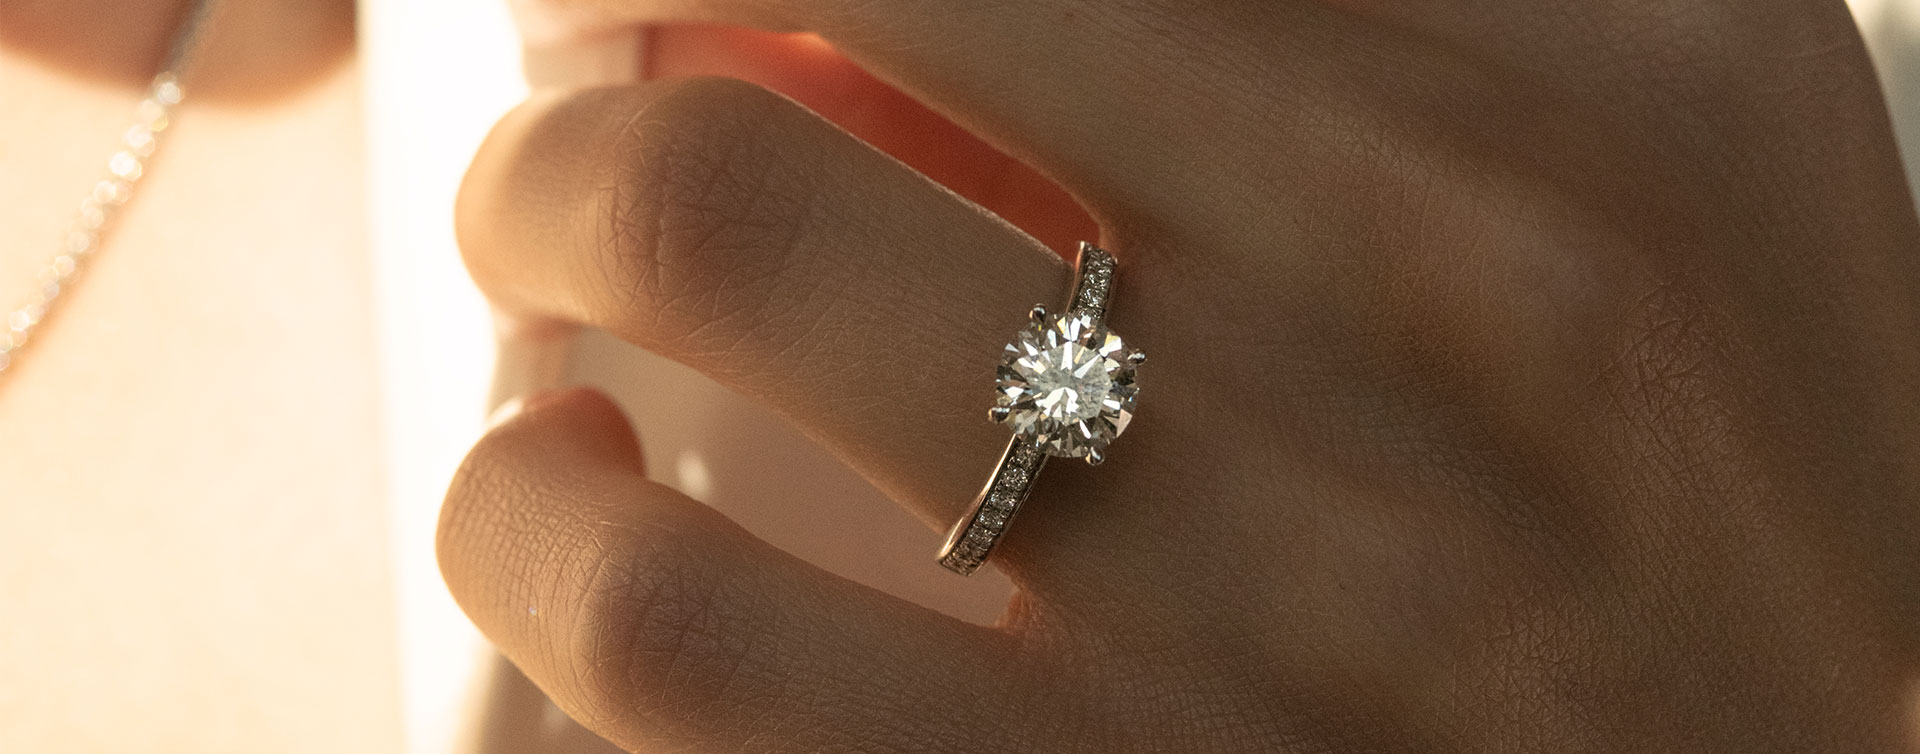 Guide to Buying a Diamond Engagement Ring: The 4C's